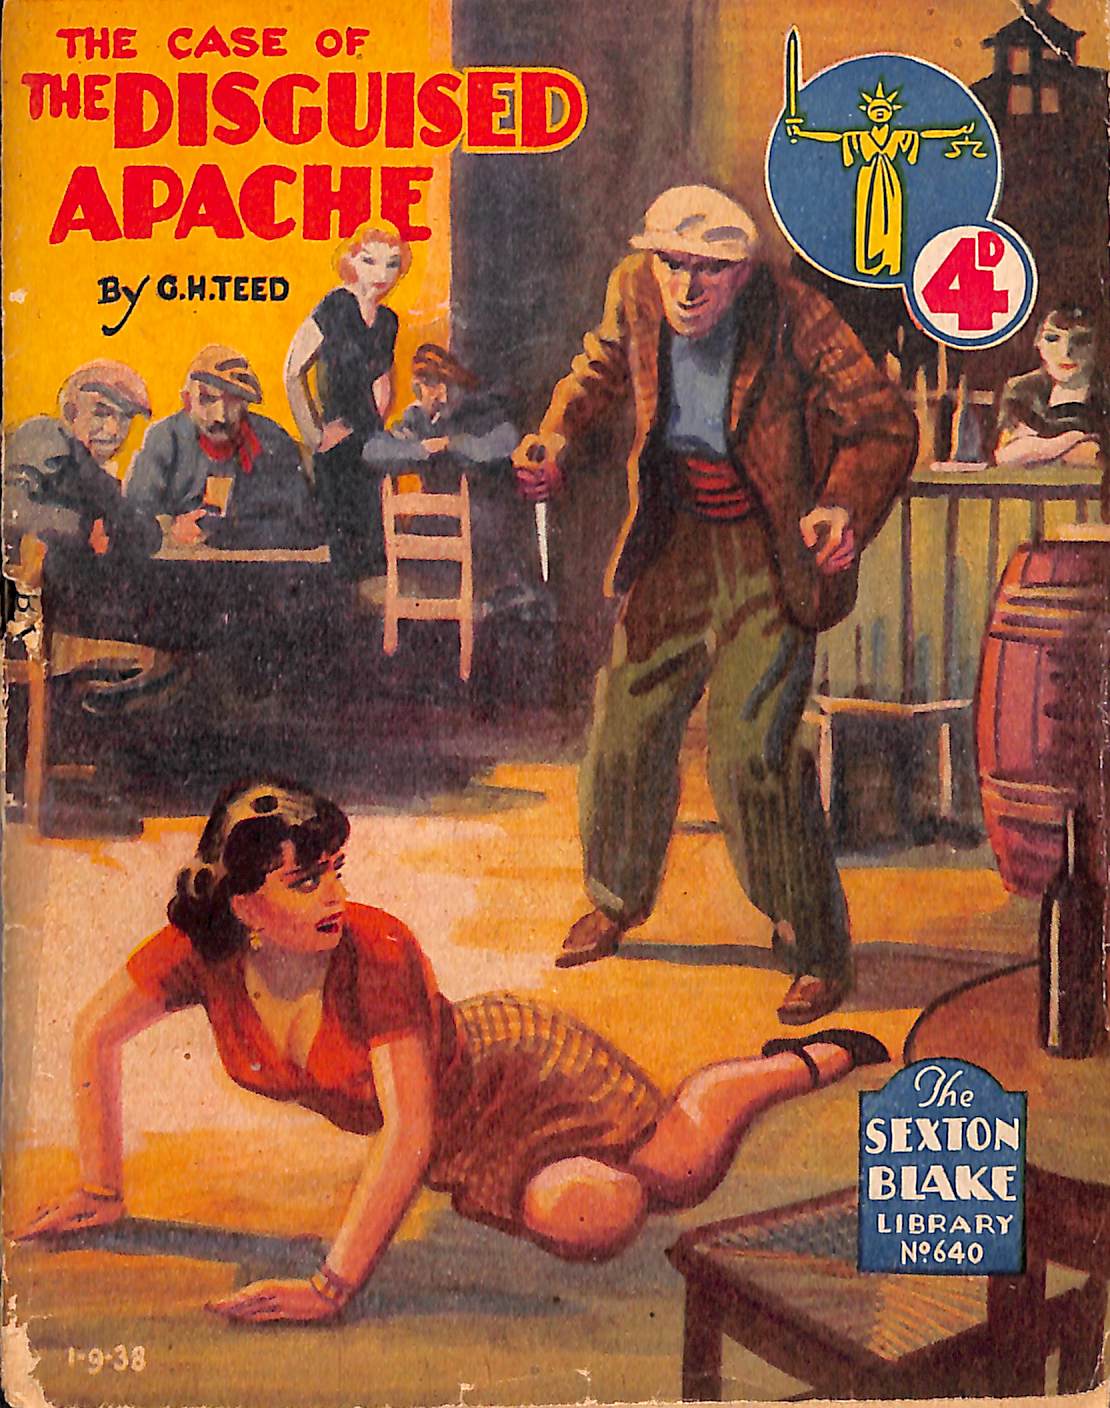 Book Cover For Sexton Blake Library S2 640 - The Case of the Disguised Apache